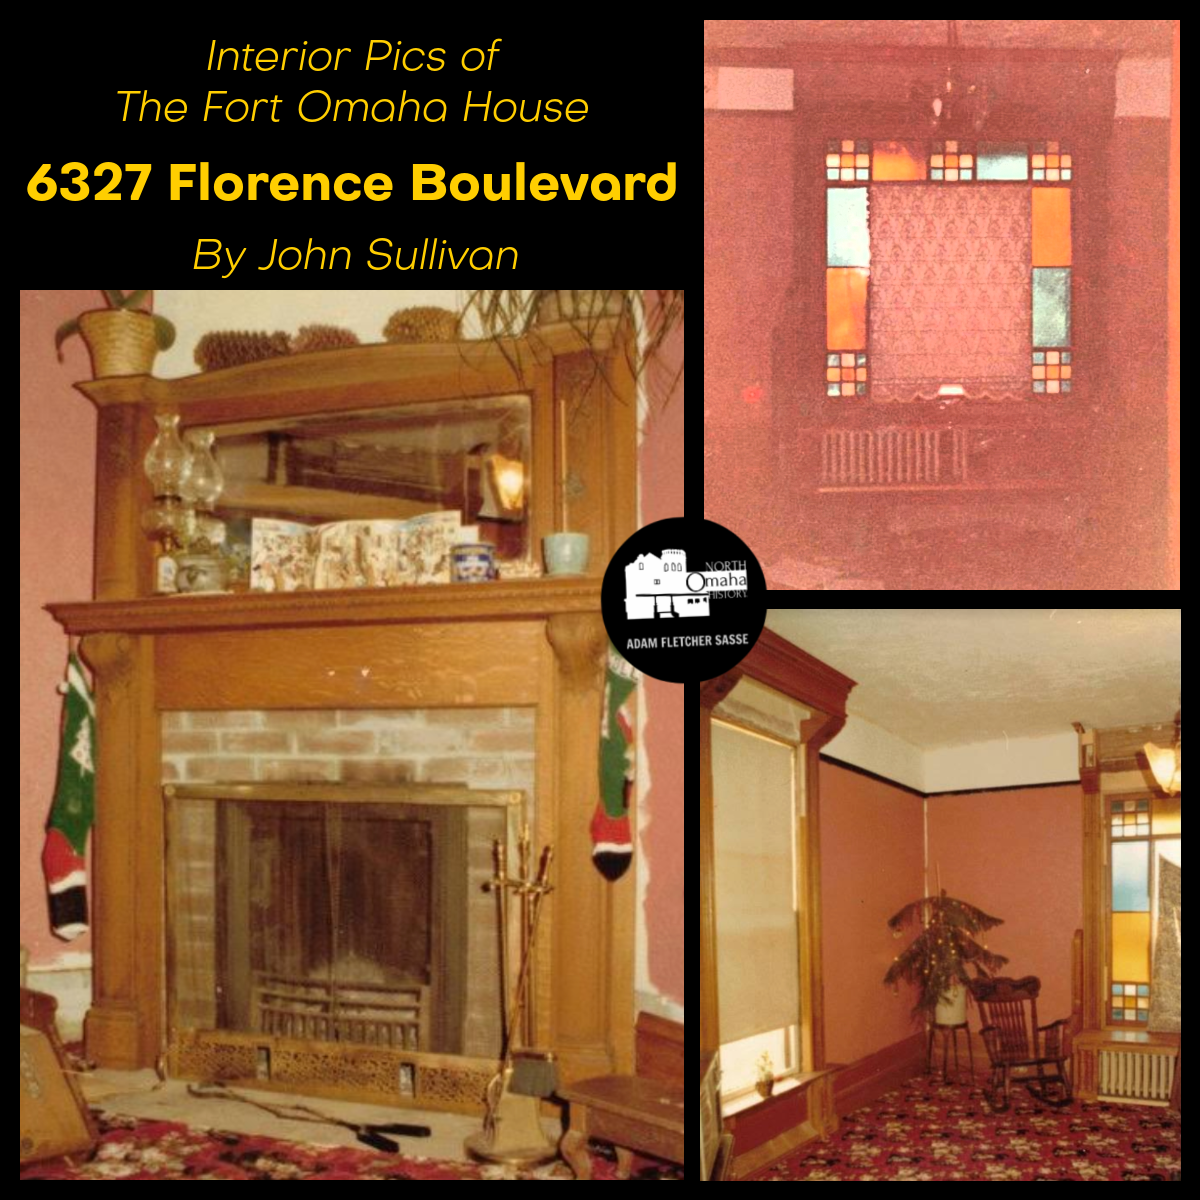 These are interior pics of 6327 Florence Boulevard from the 1970s.